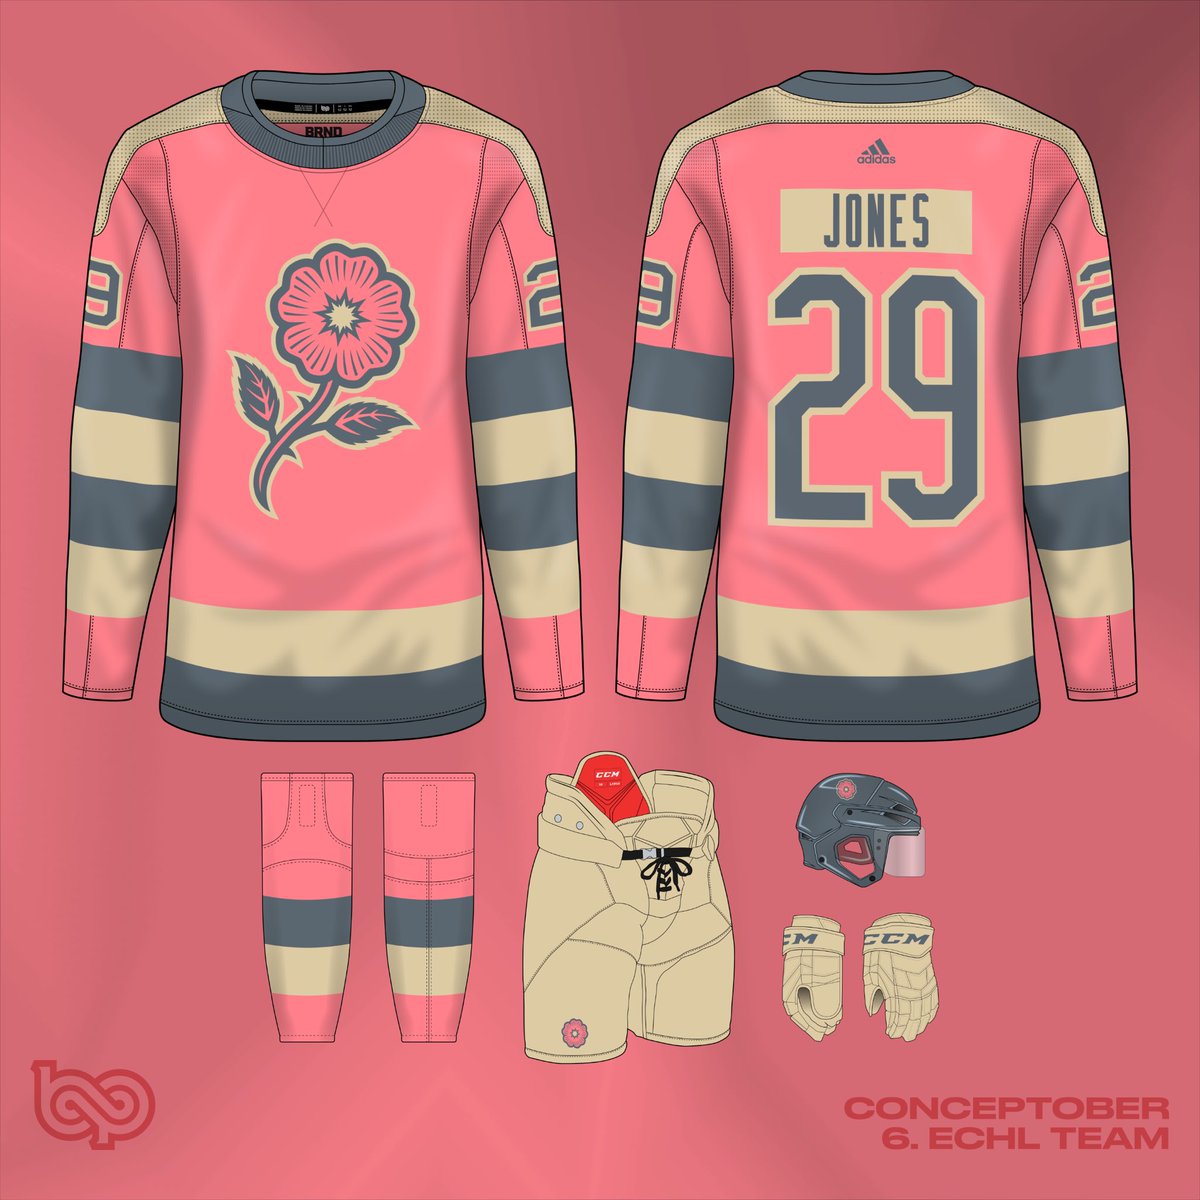 #Conceptober Day 6: ECHL Team Not the direction I was expecting to go when I started this jersey but I love where it ended up. #conceptober2023 @The_JerseyNerds